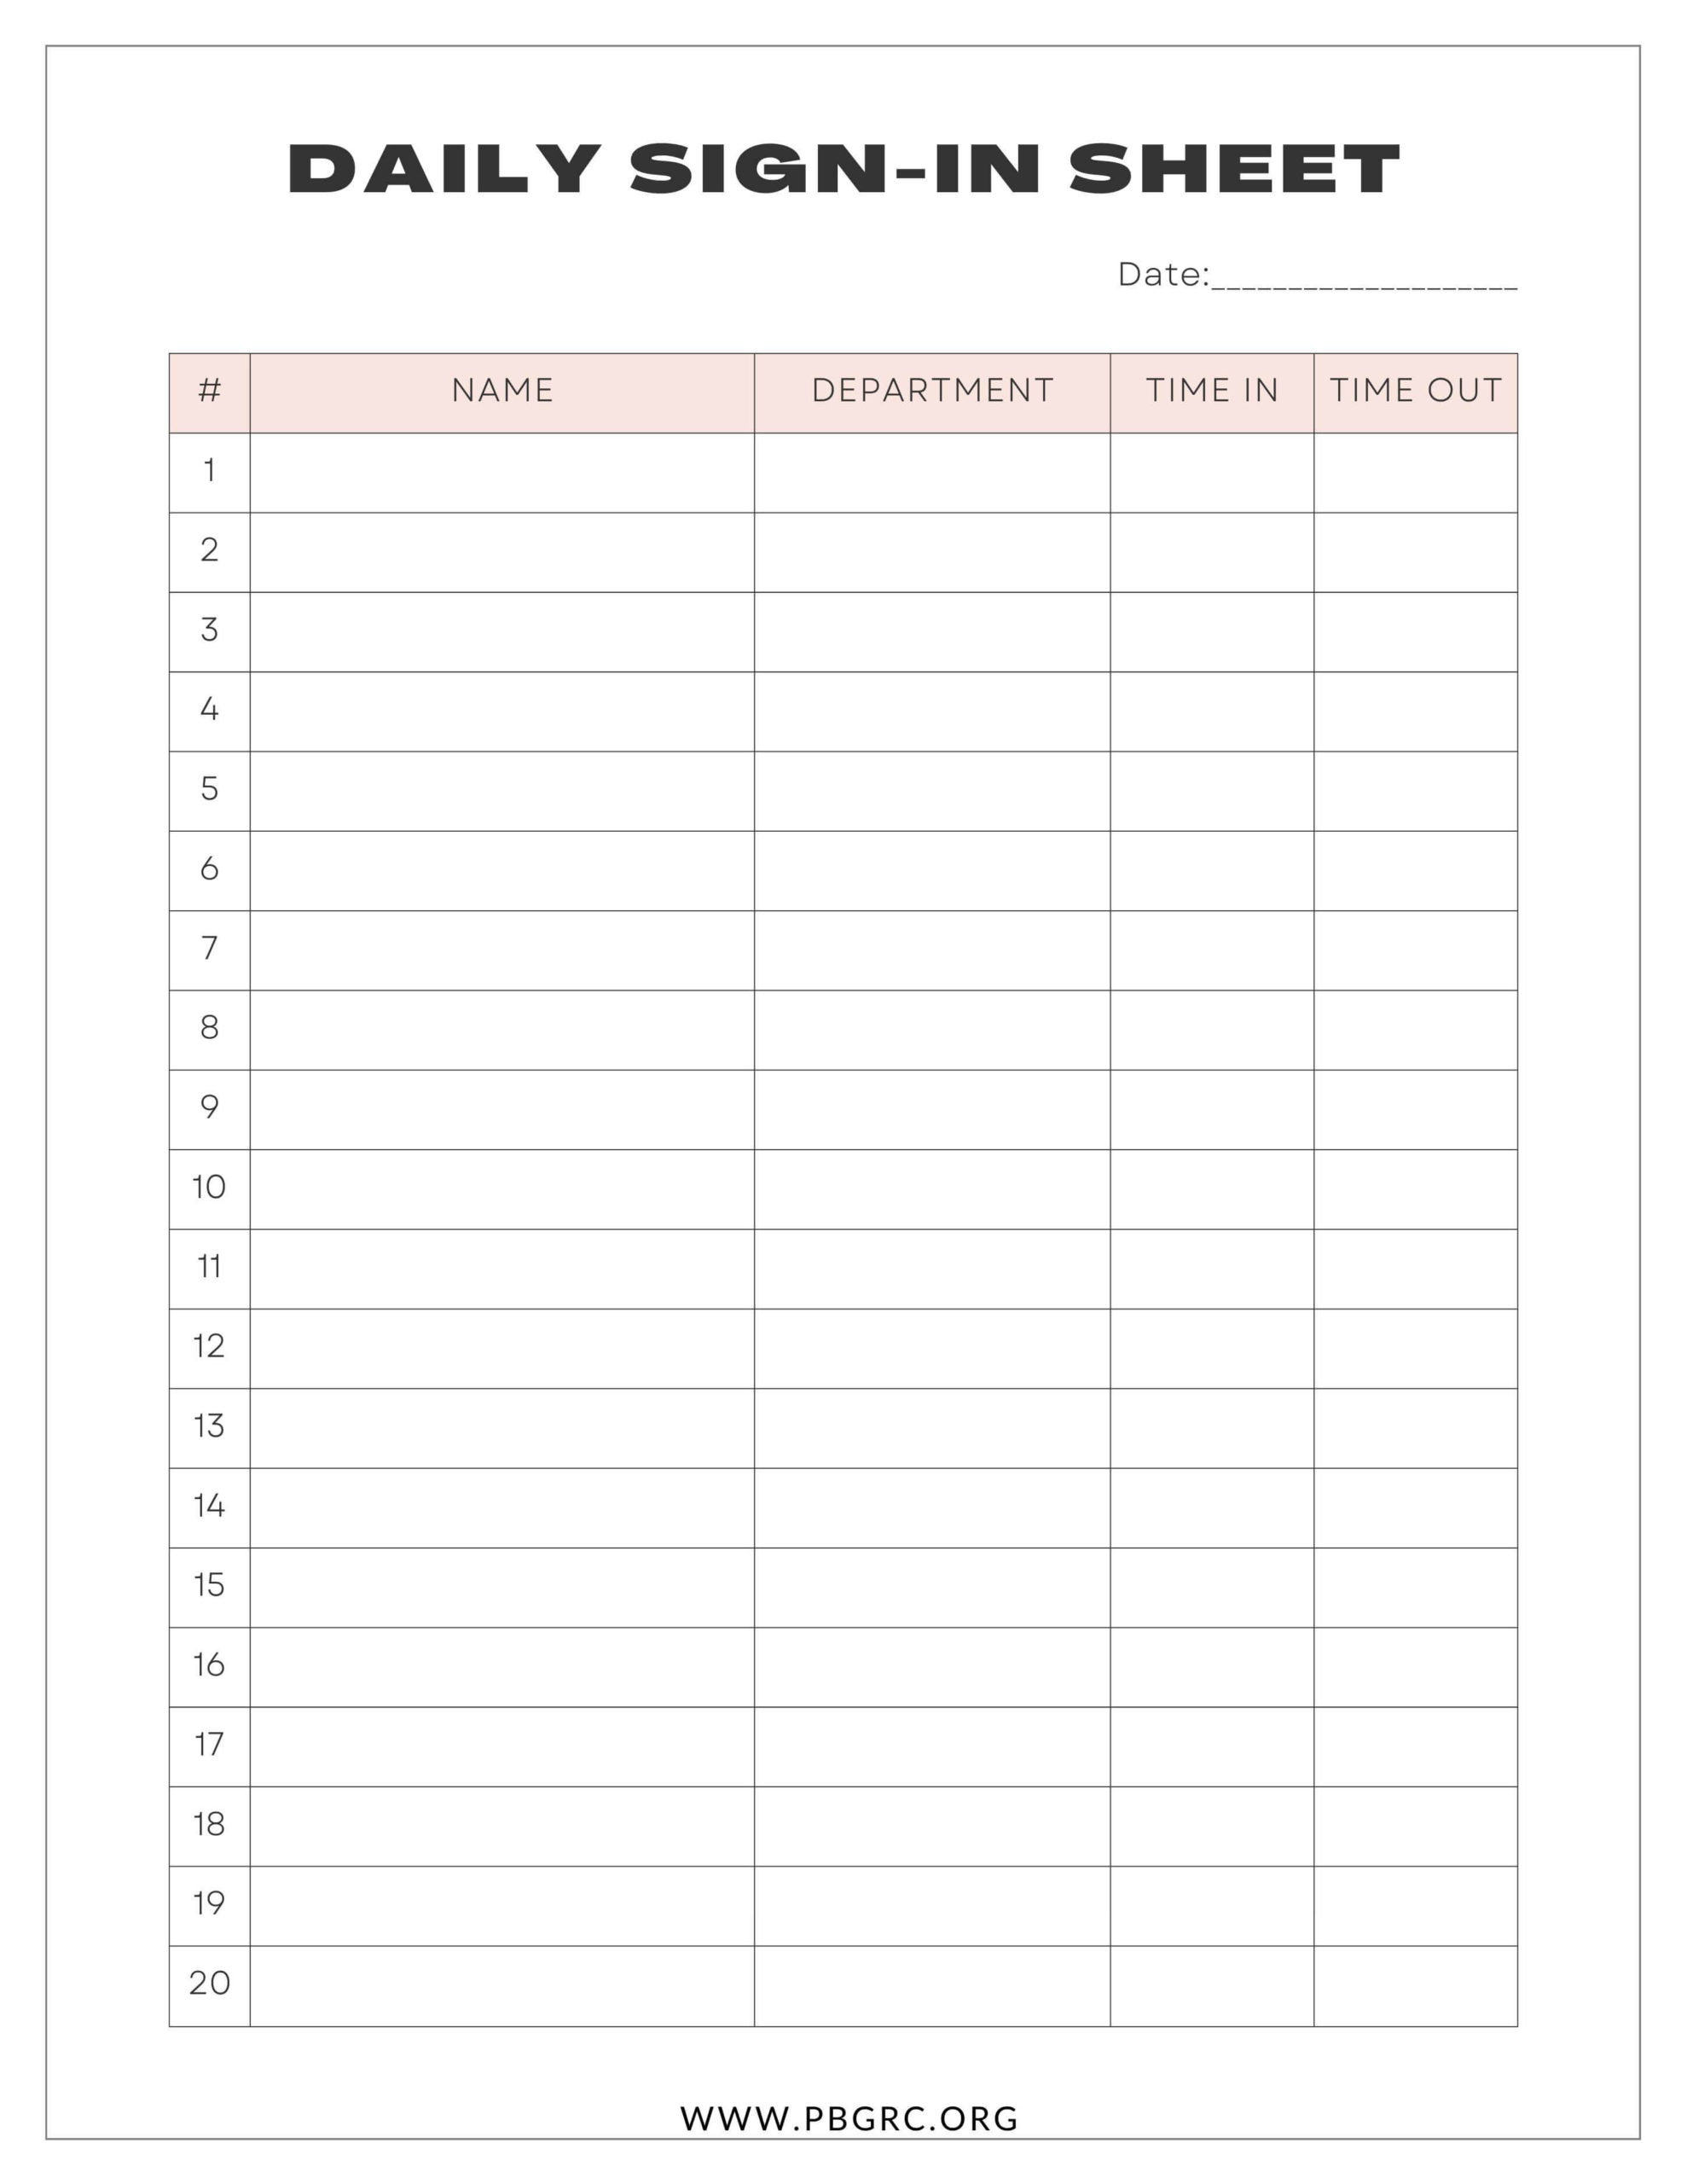 Sign-In Sheet